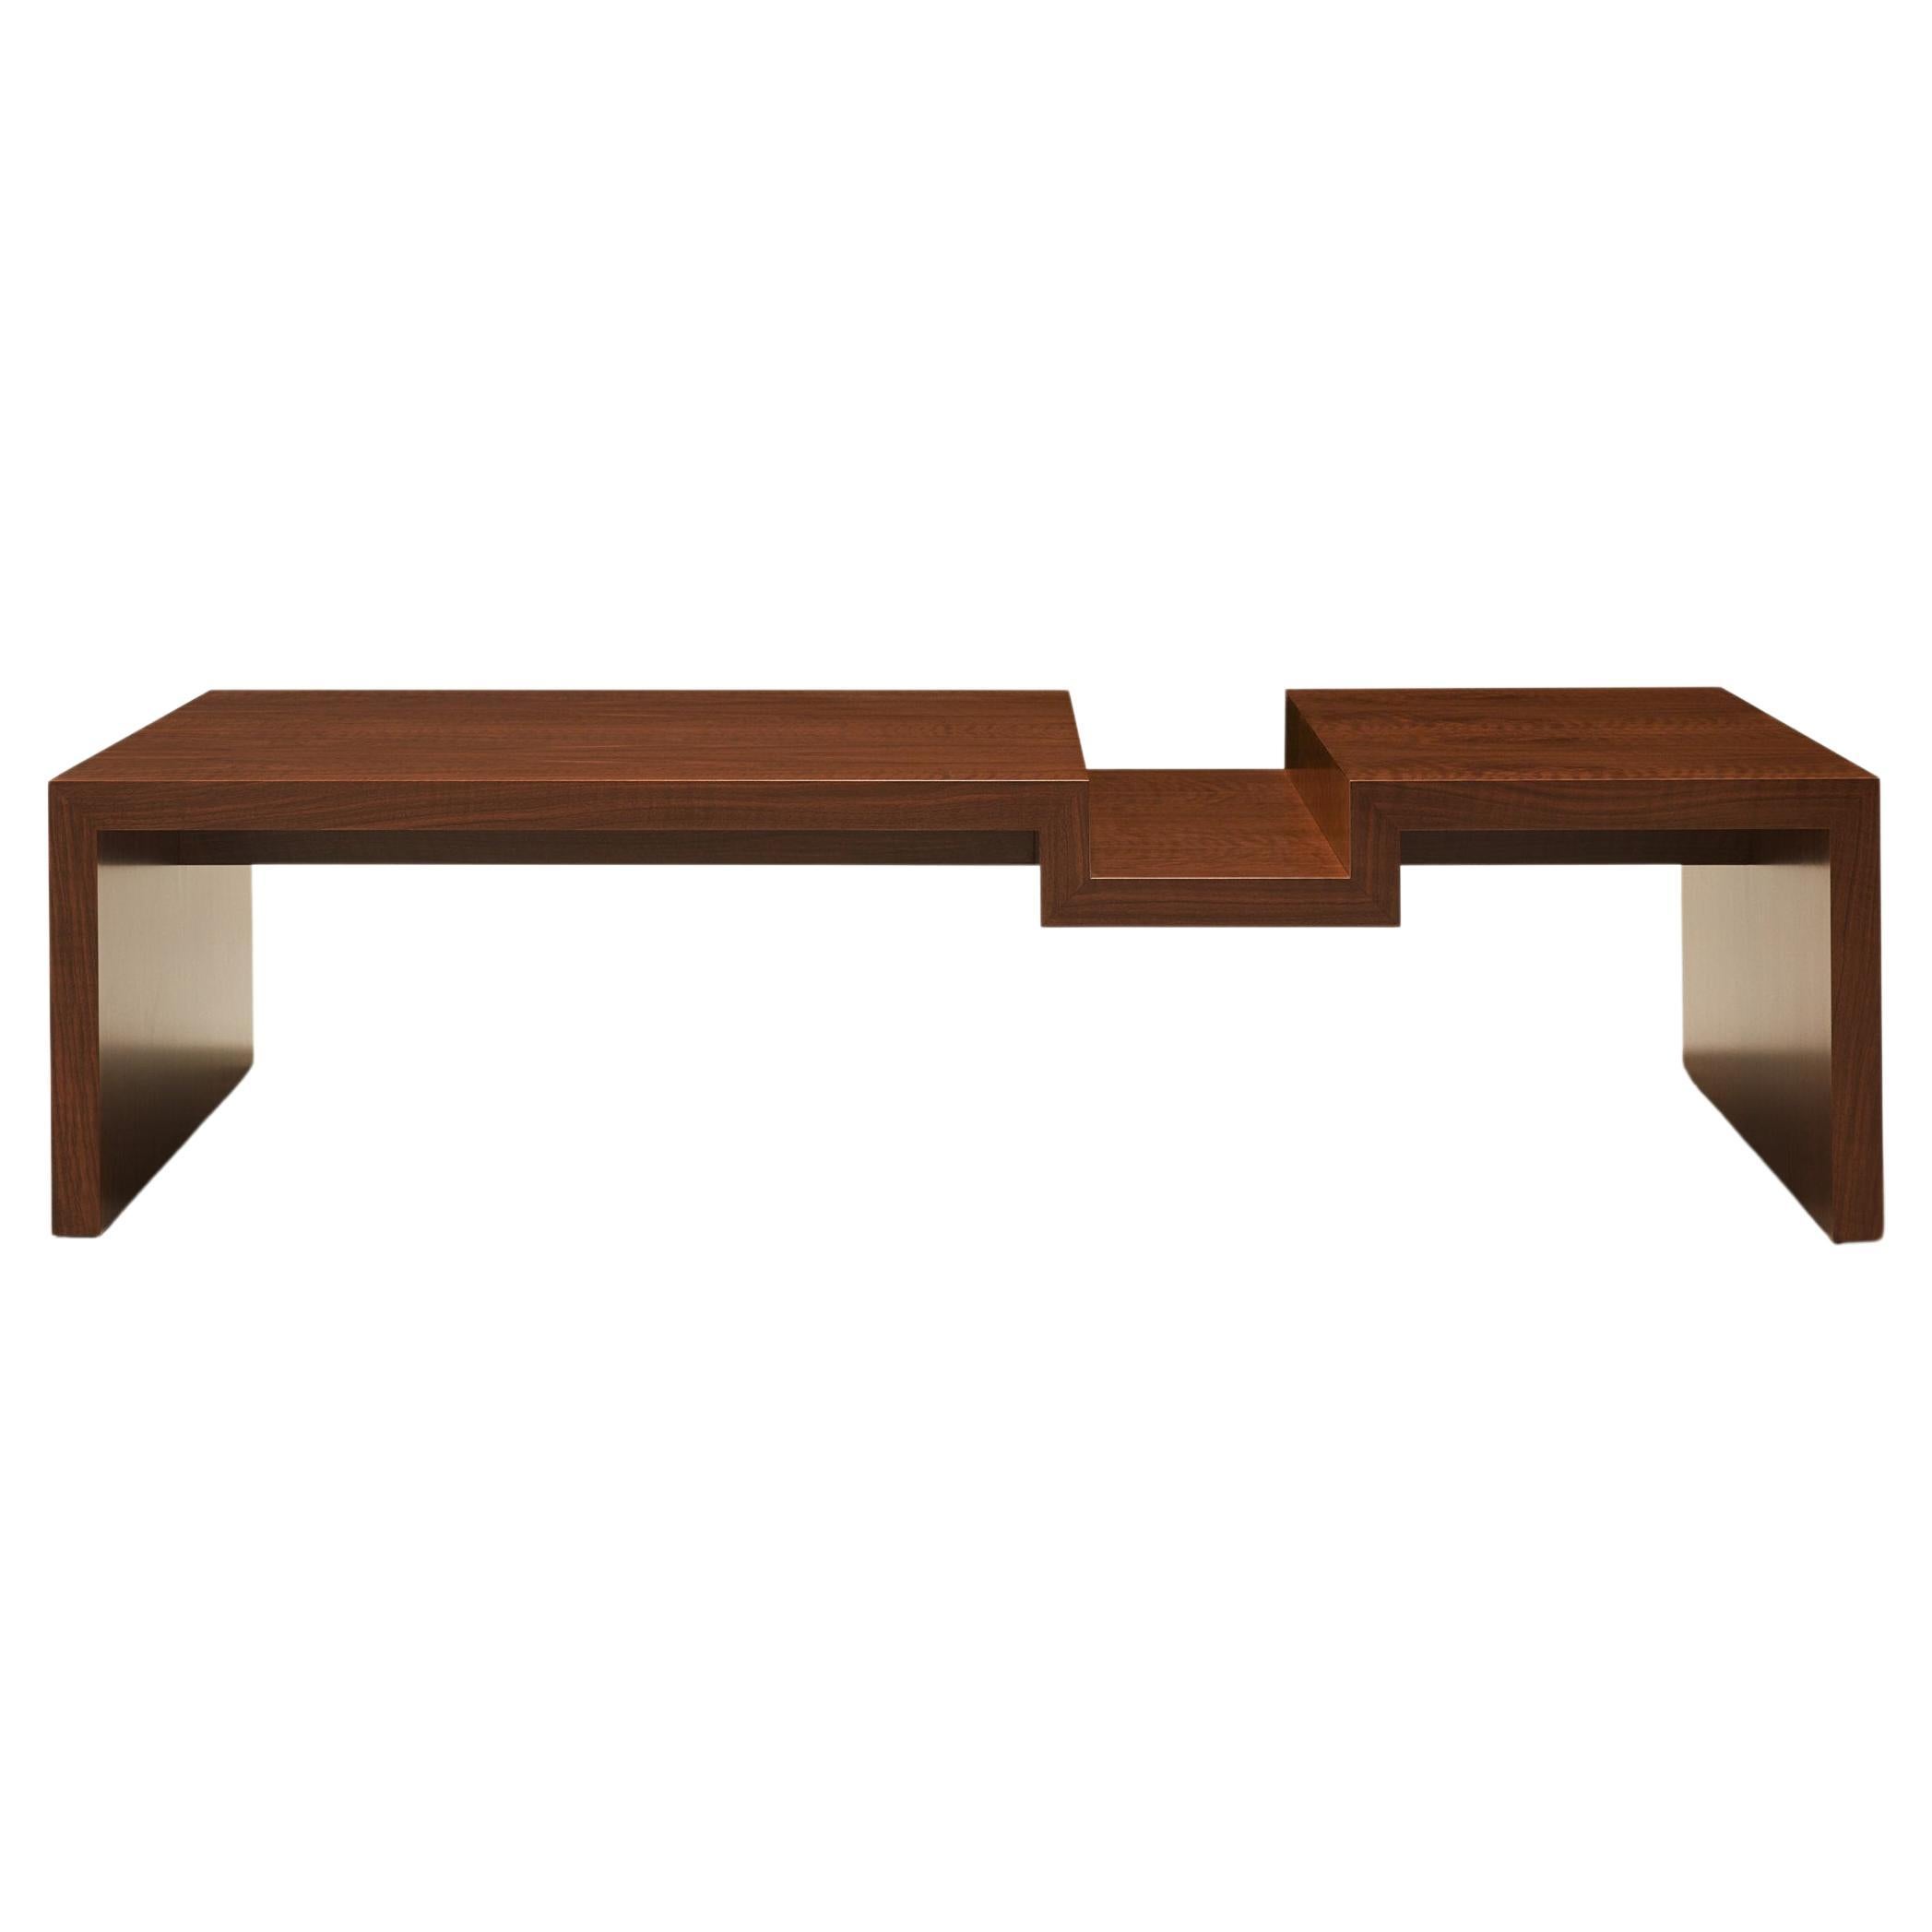 Continuous Coffee Table I - Hand applied wood veneer For Sale